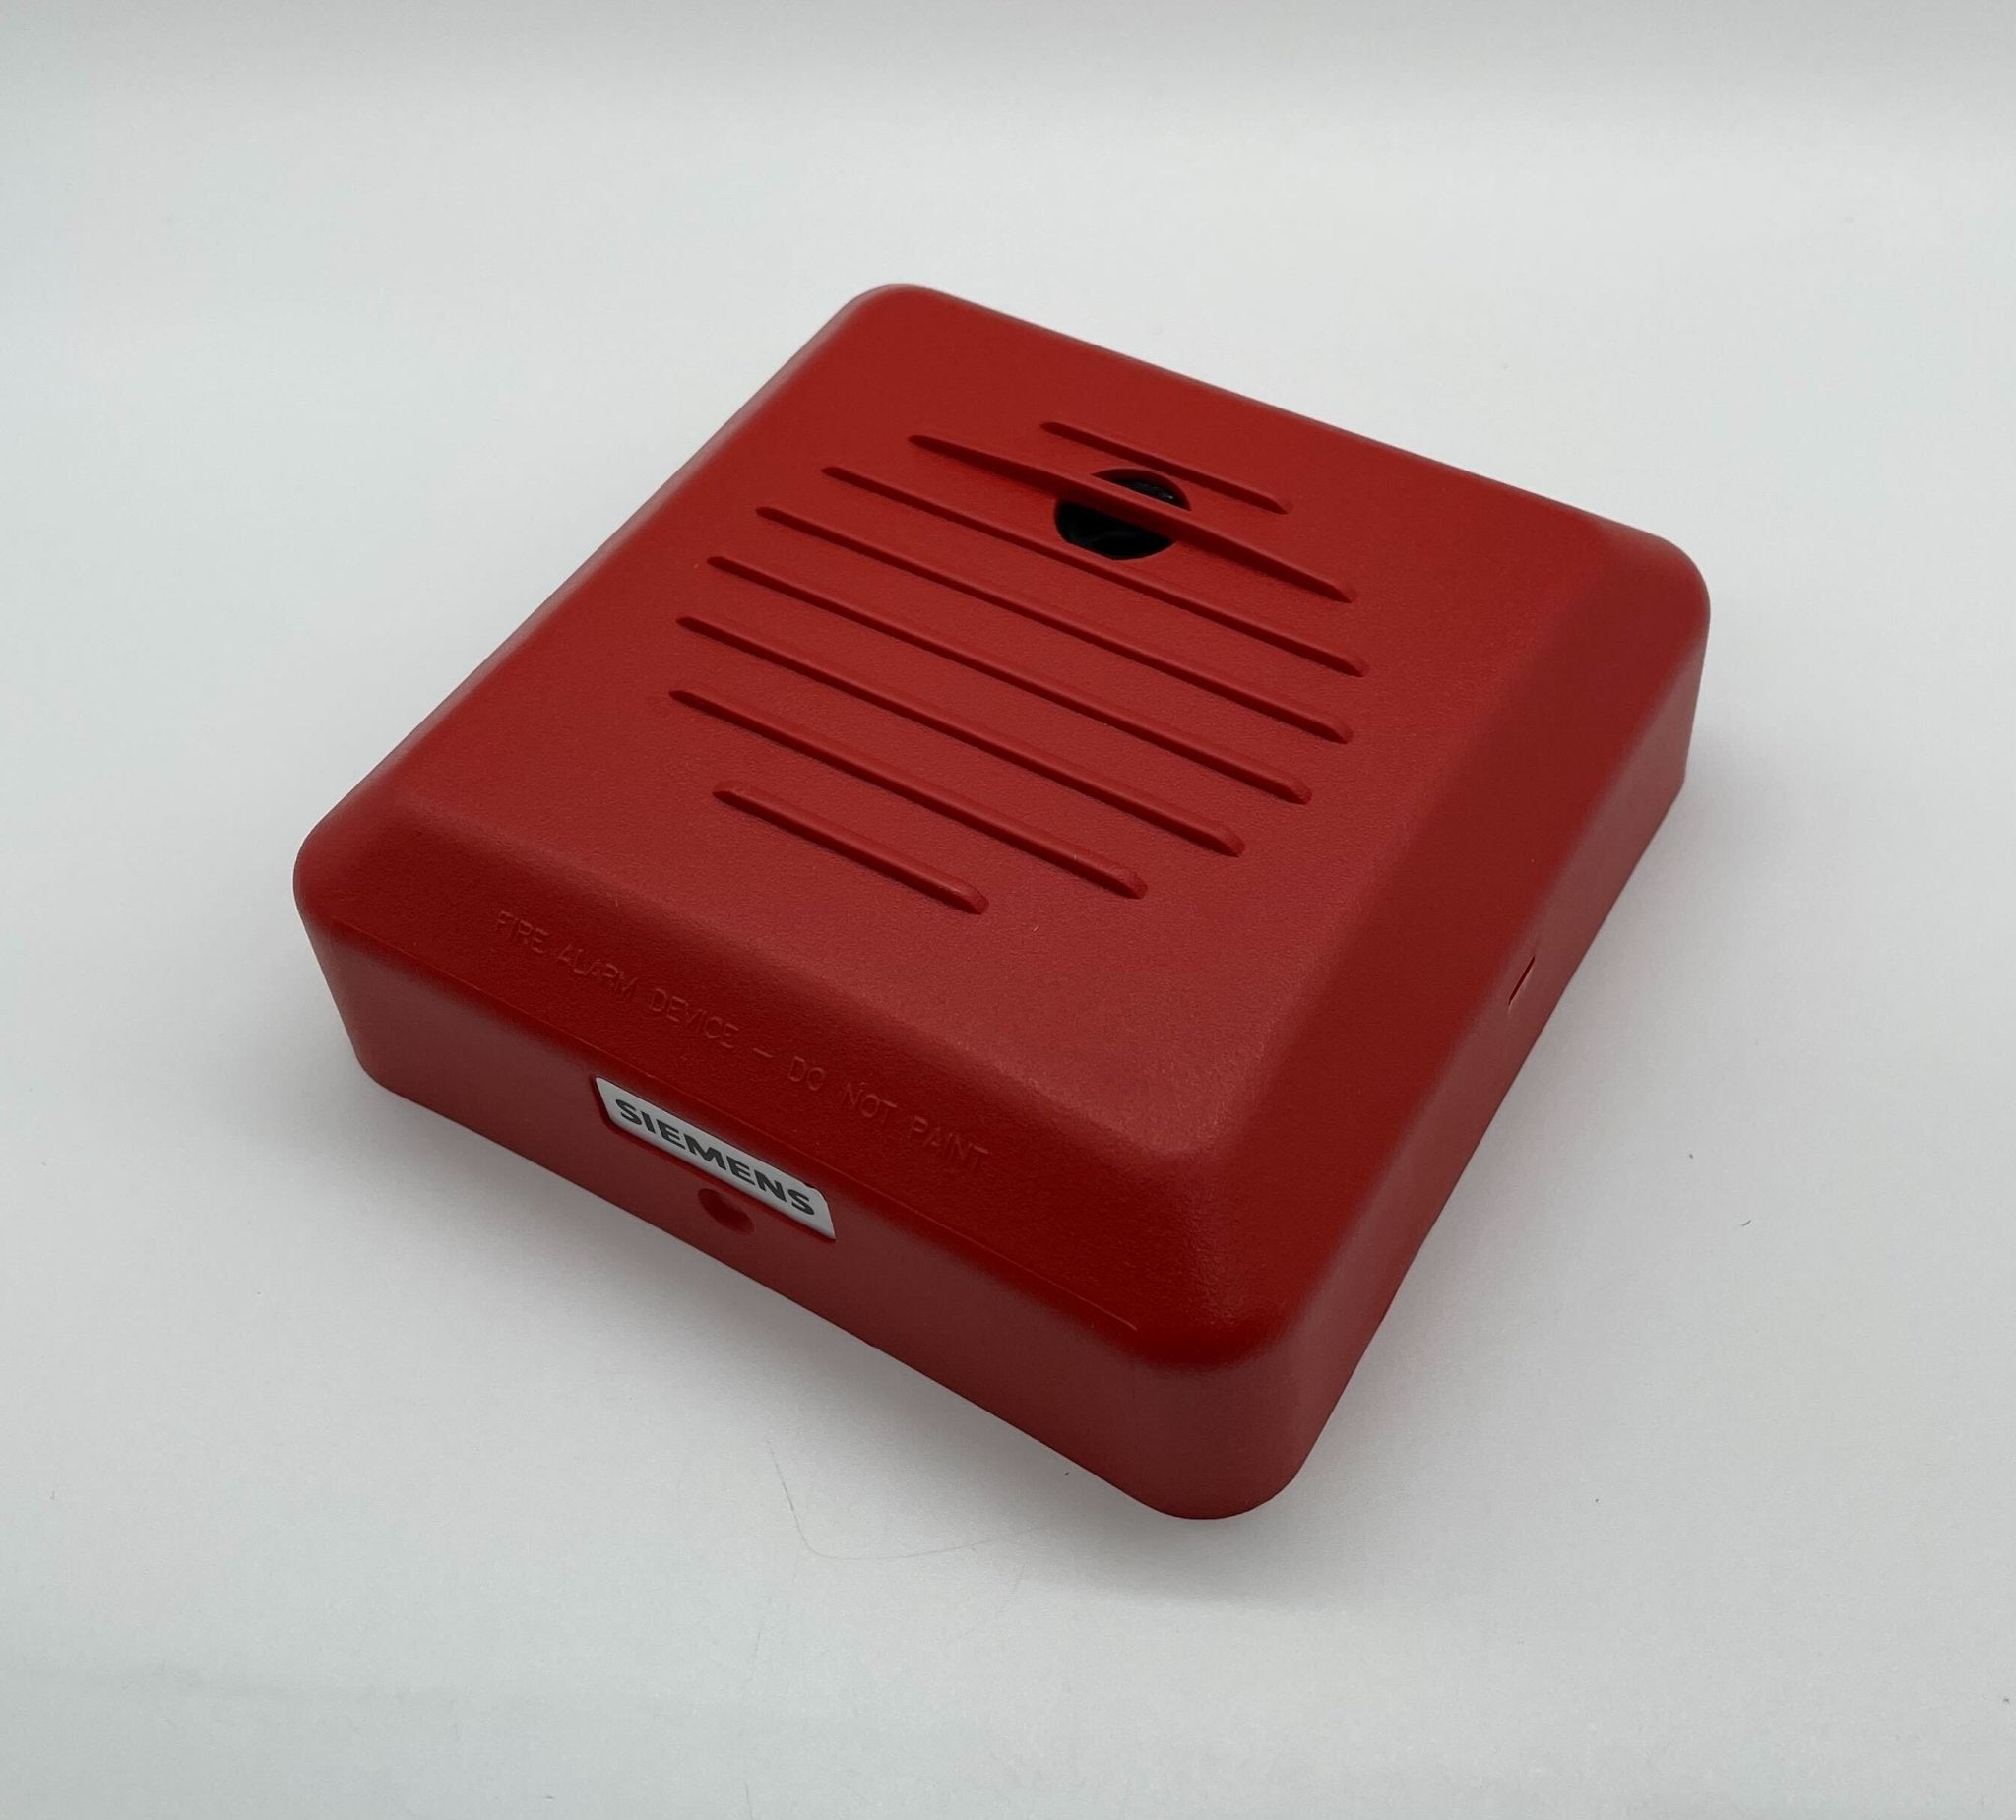 Siemens ZH-R Red Horn - The Fire Alarm Supplier